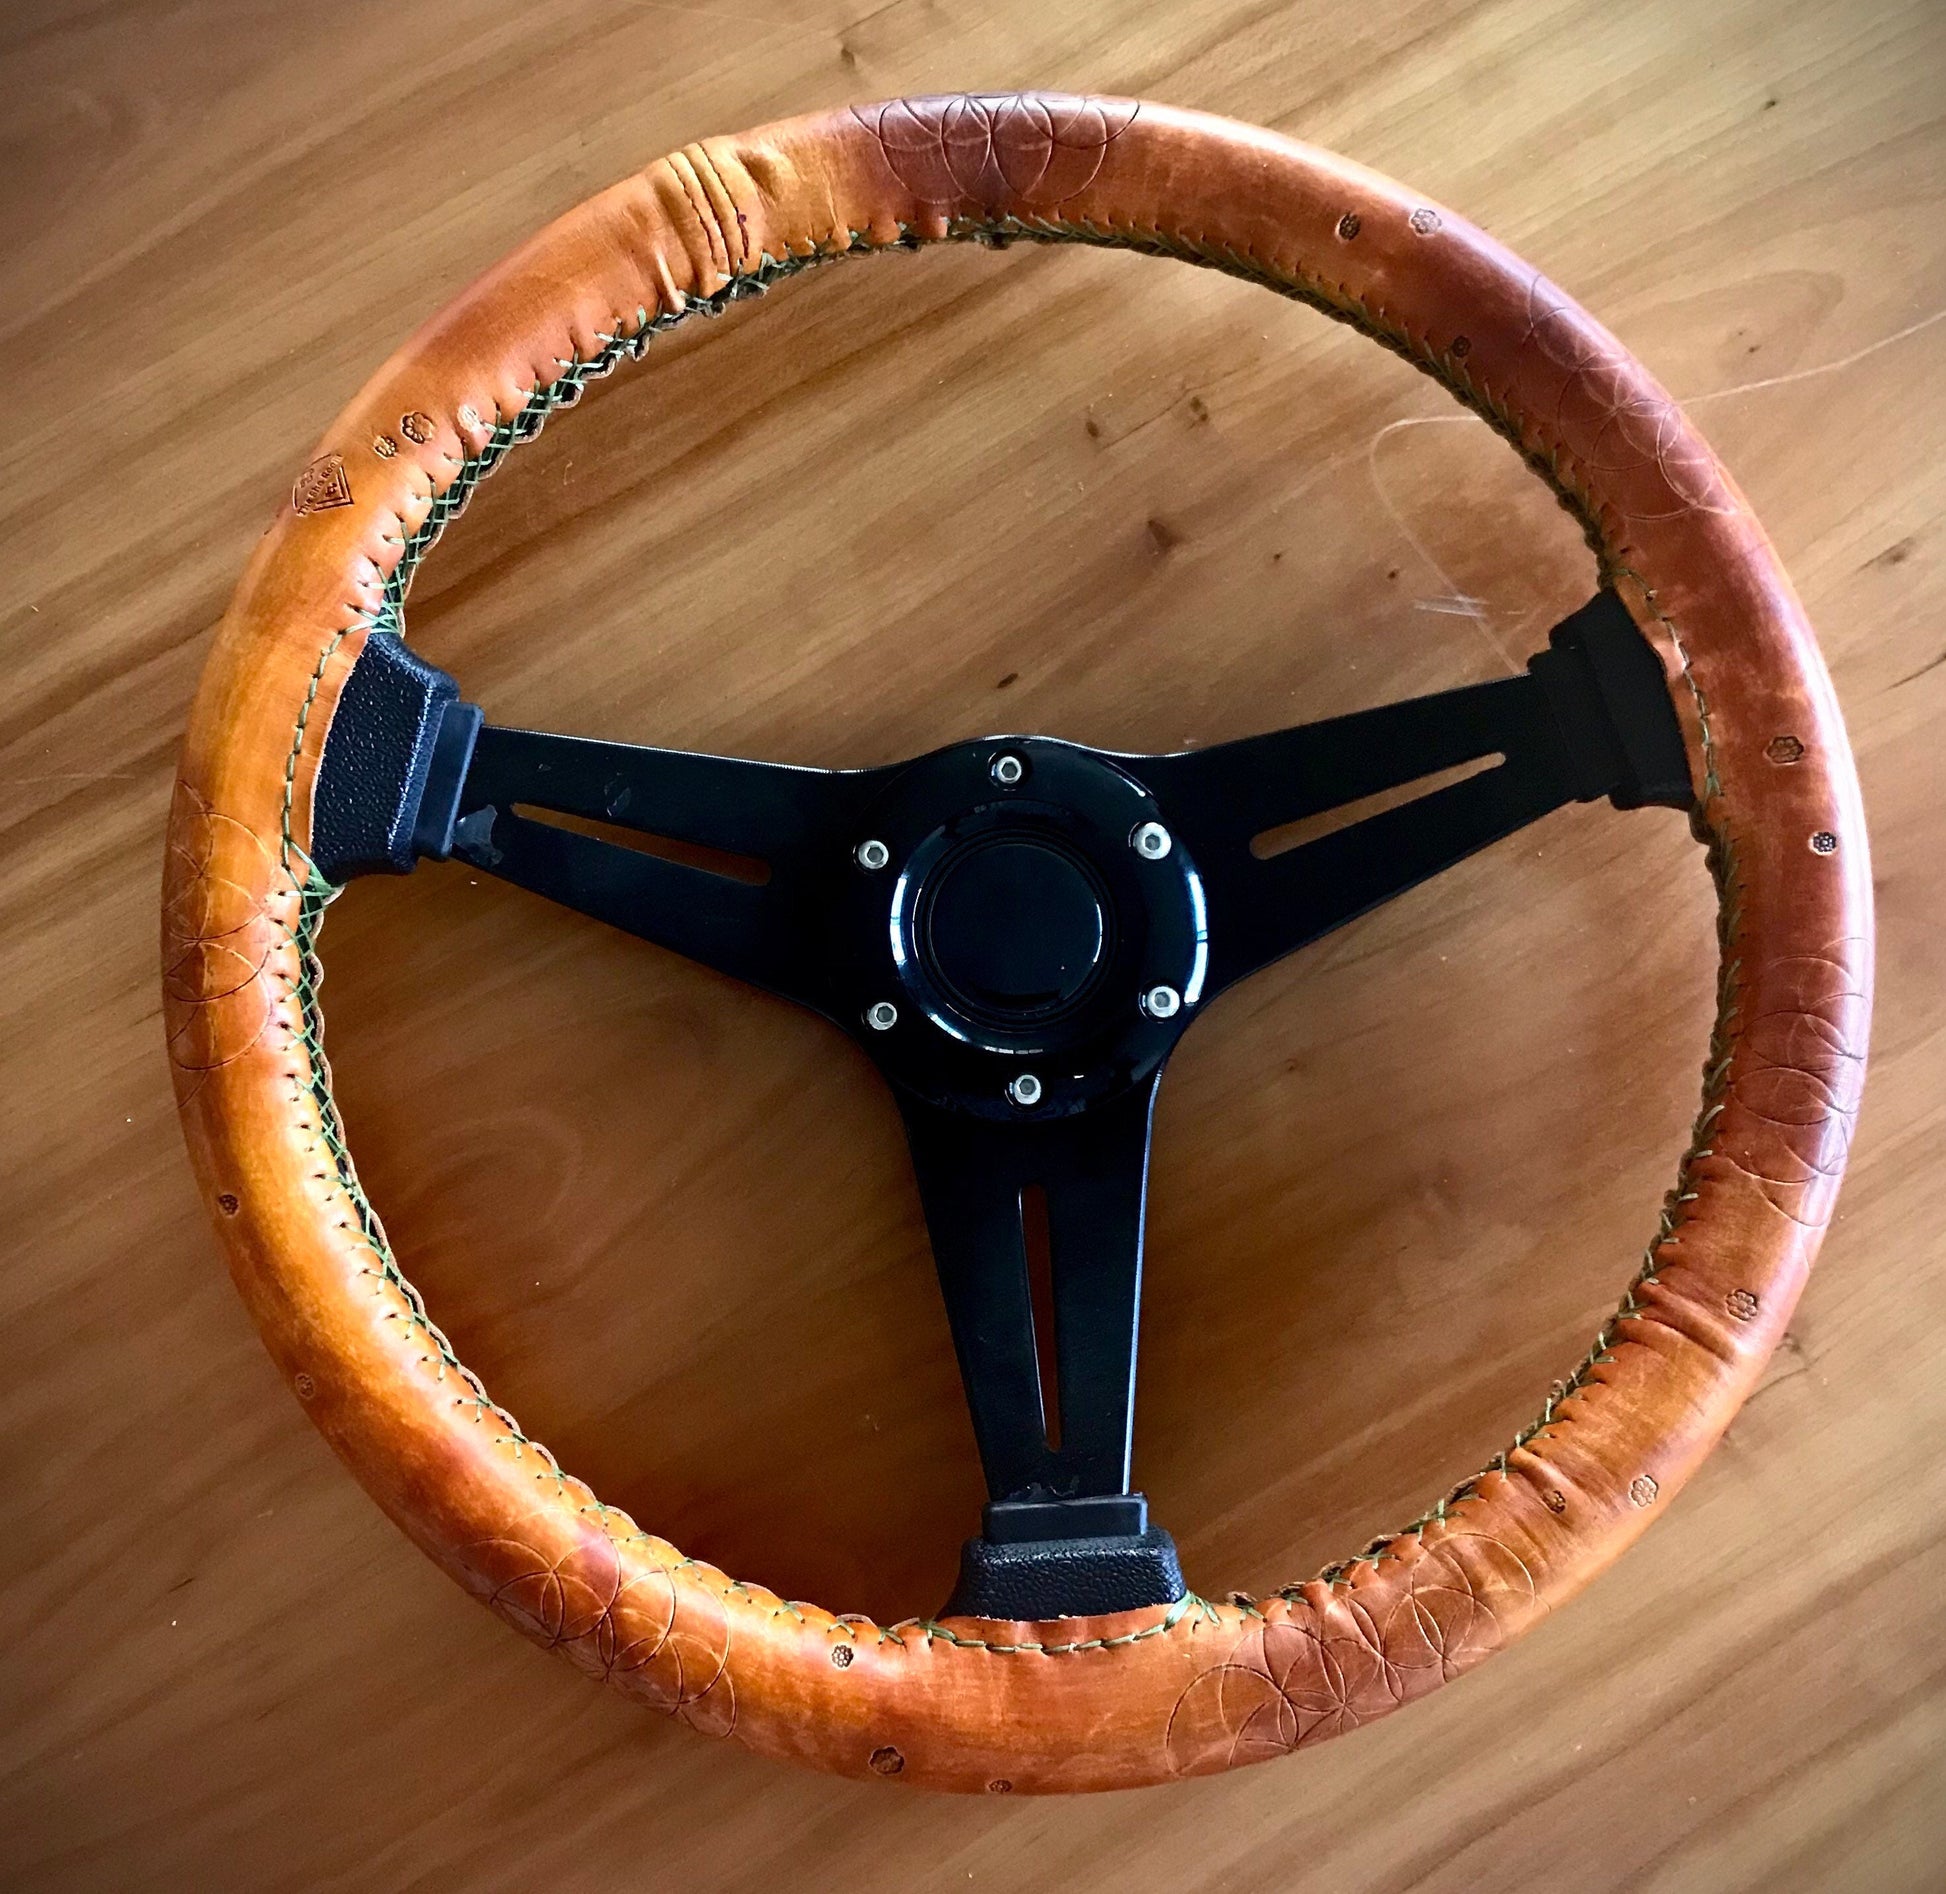 Types of Steering Wheel Leather Wraps, Car Steering Leather Wrap